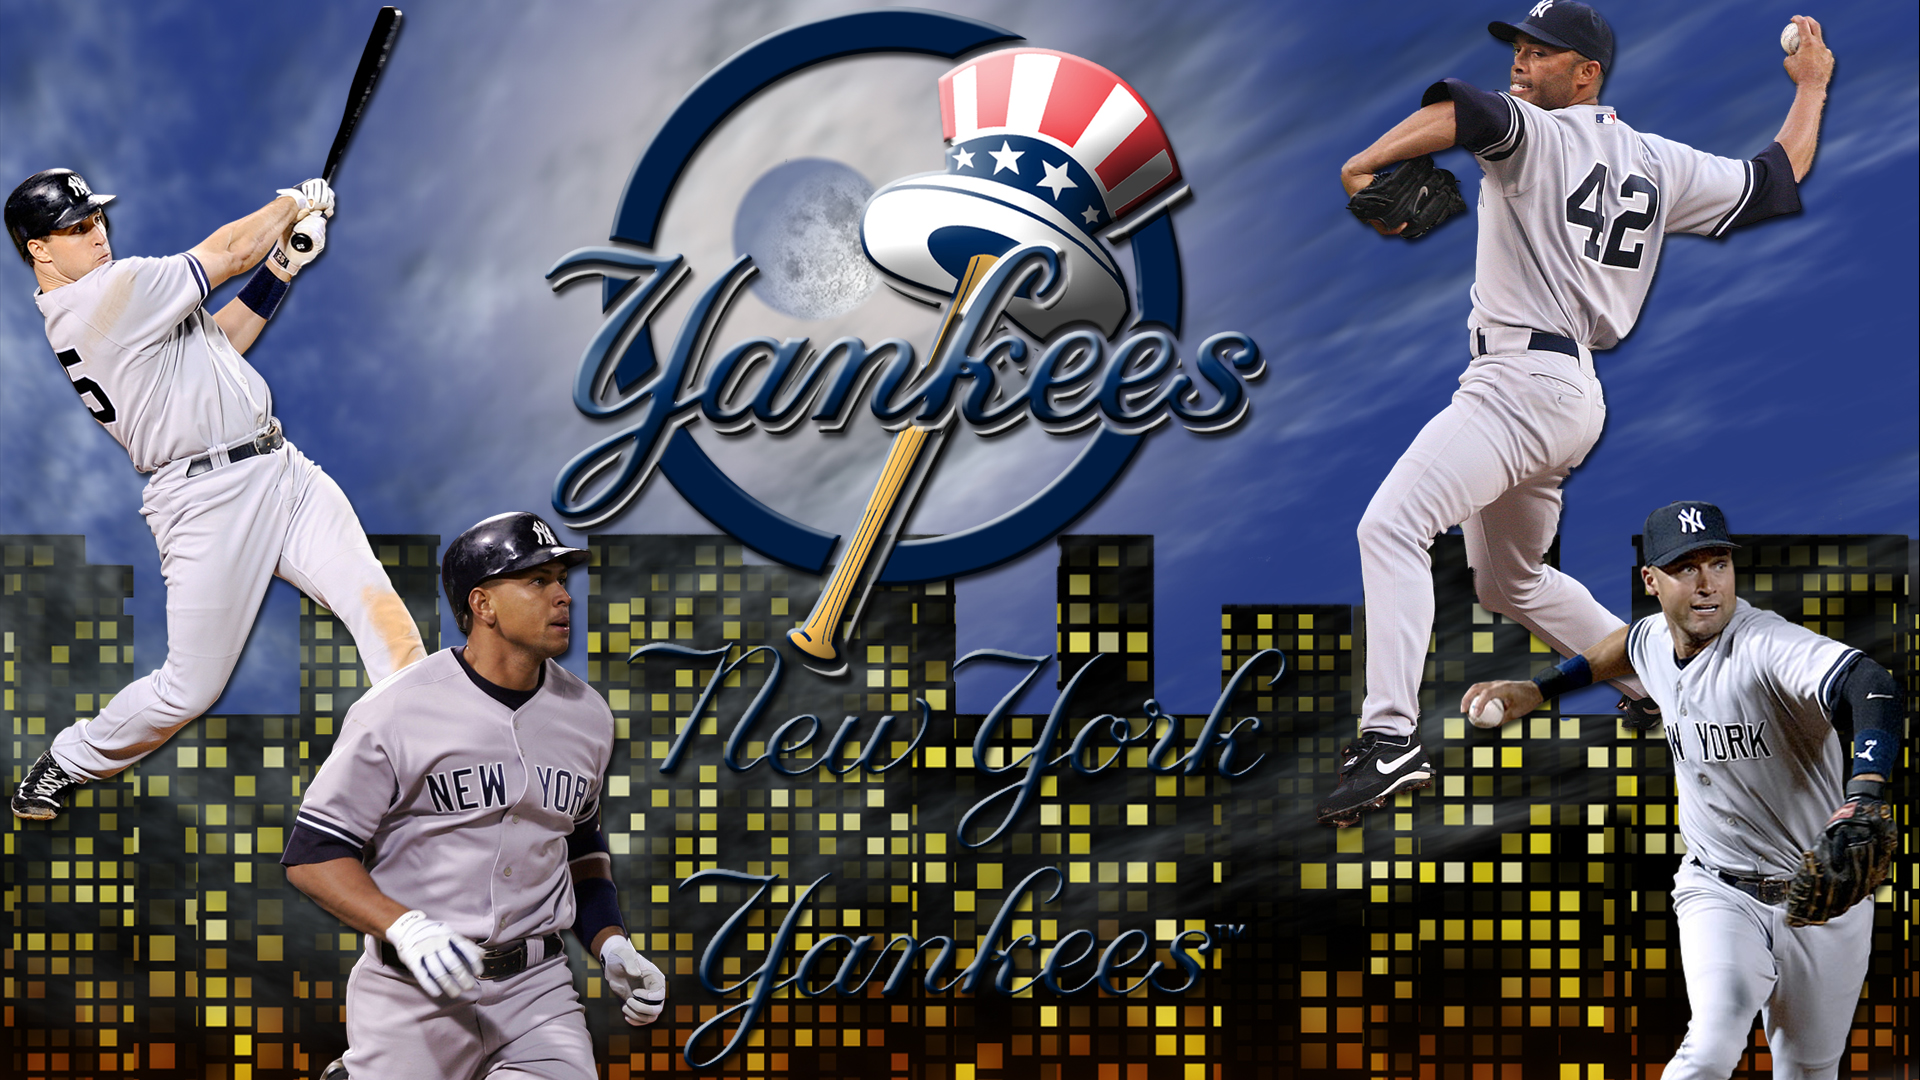 Wallpaper By Wicked Shadows New York Yankees Night Sky